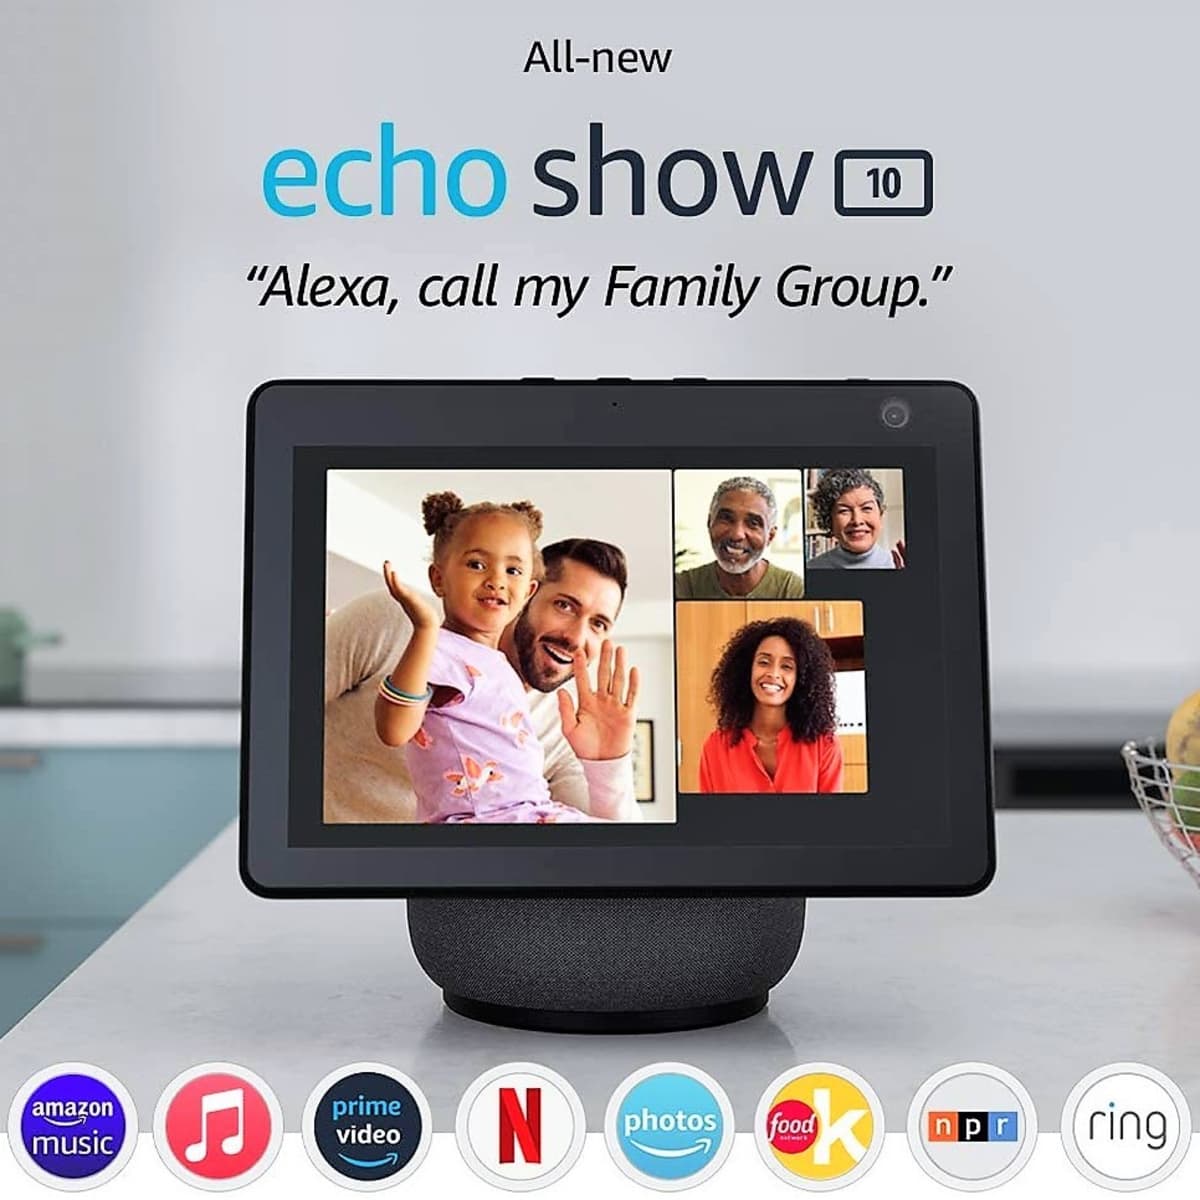 Monkey Bathroom enthusiastic Top 10 Reasons to Buy an Amazon Echo Show (All Generations) - TurboFuture